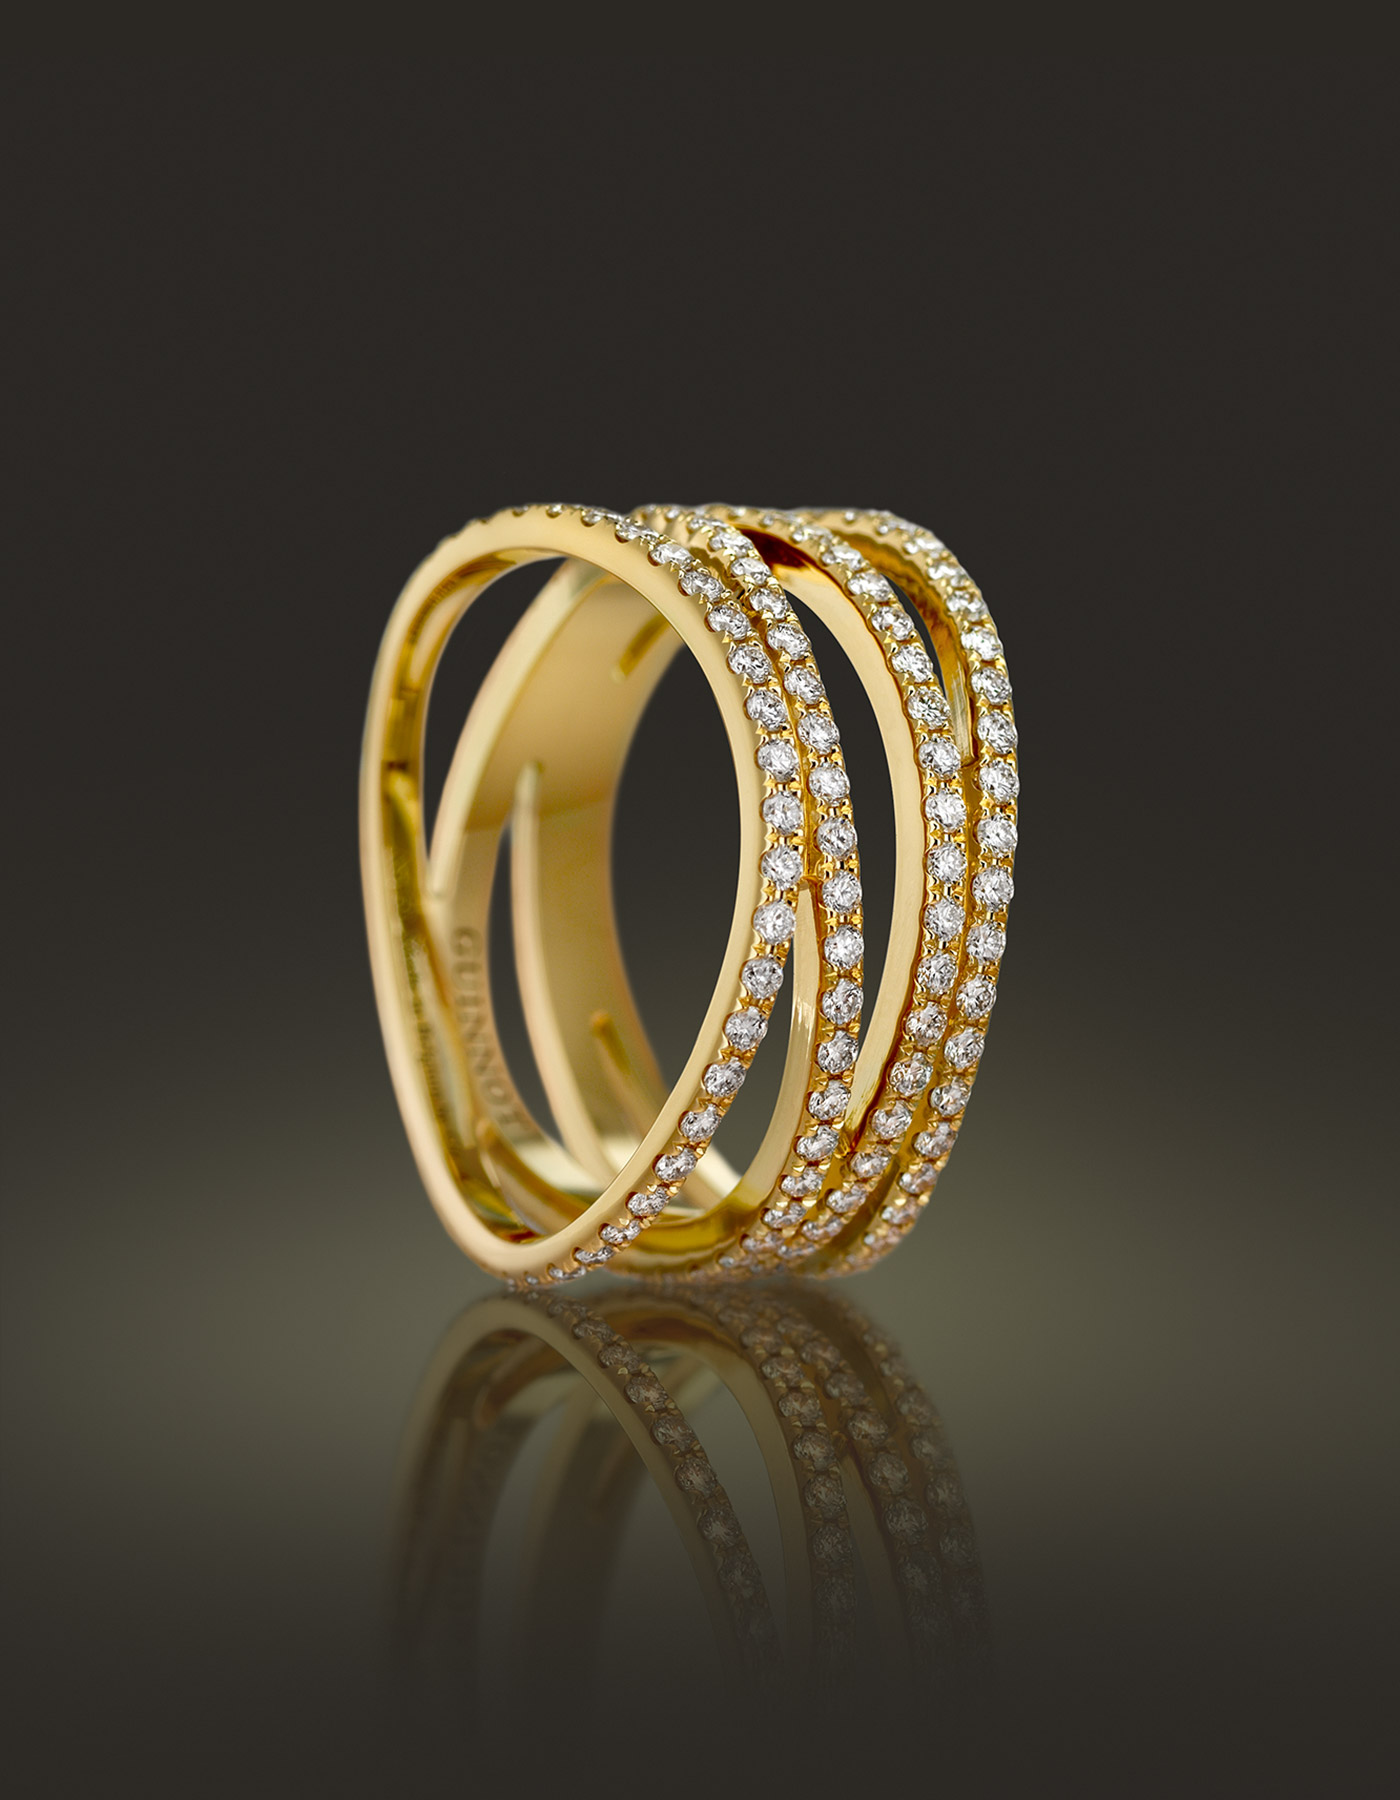 Guinnot Anonymous Micropavé diamond spiral ring in 18k yellow gold